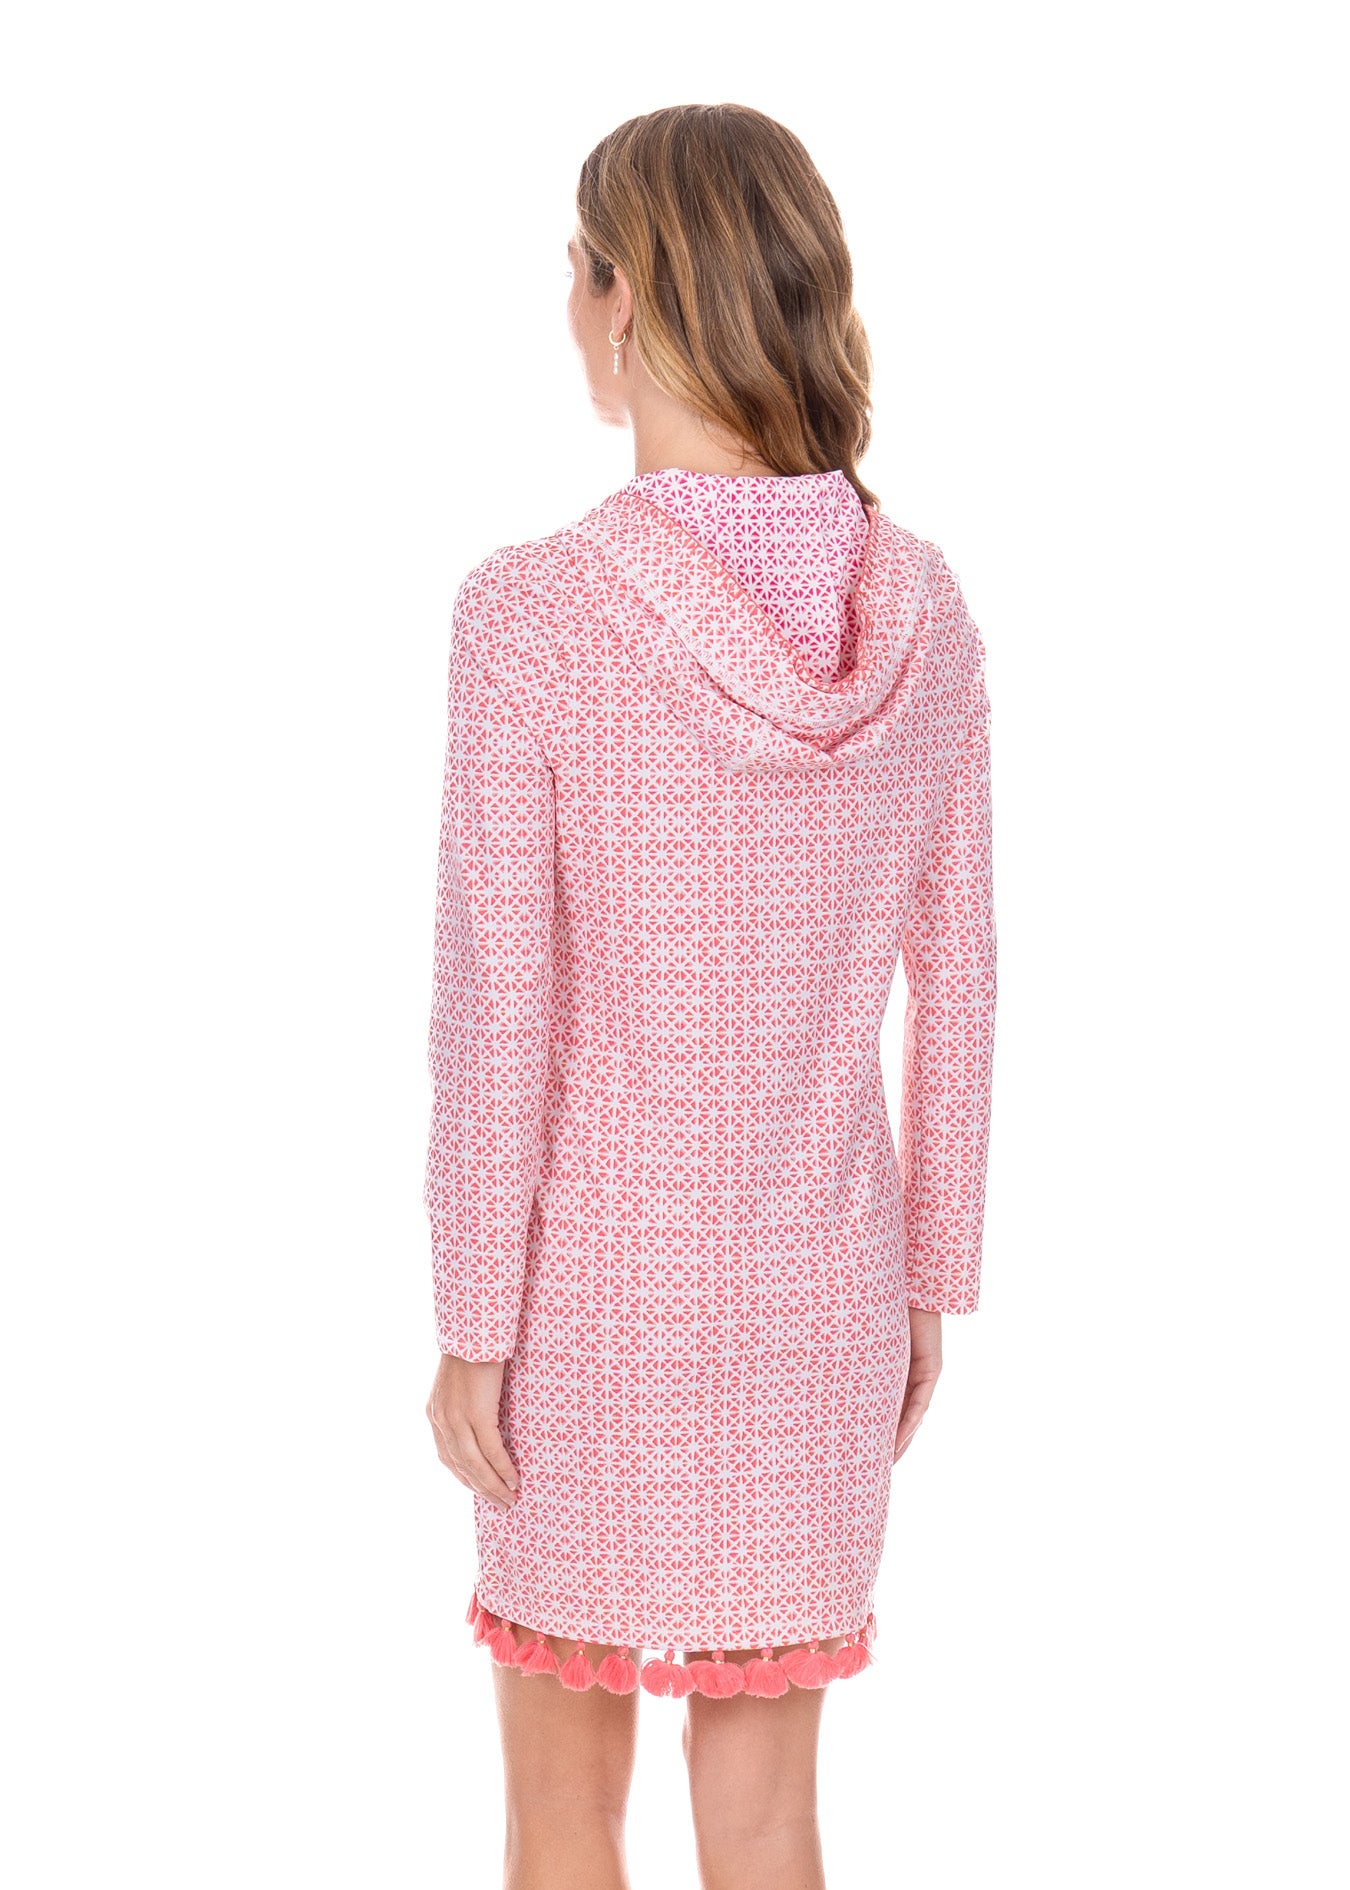 Blonde woman wearing the Algarve Hooded Cover Up, showing the magenta print on the inside of the hood.